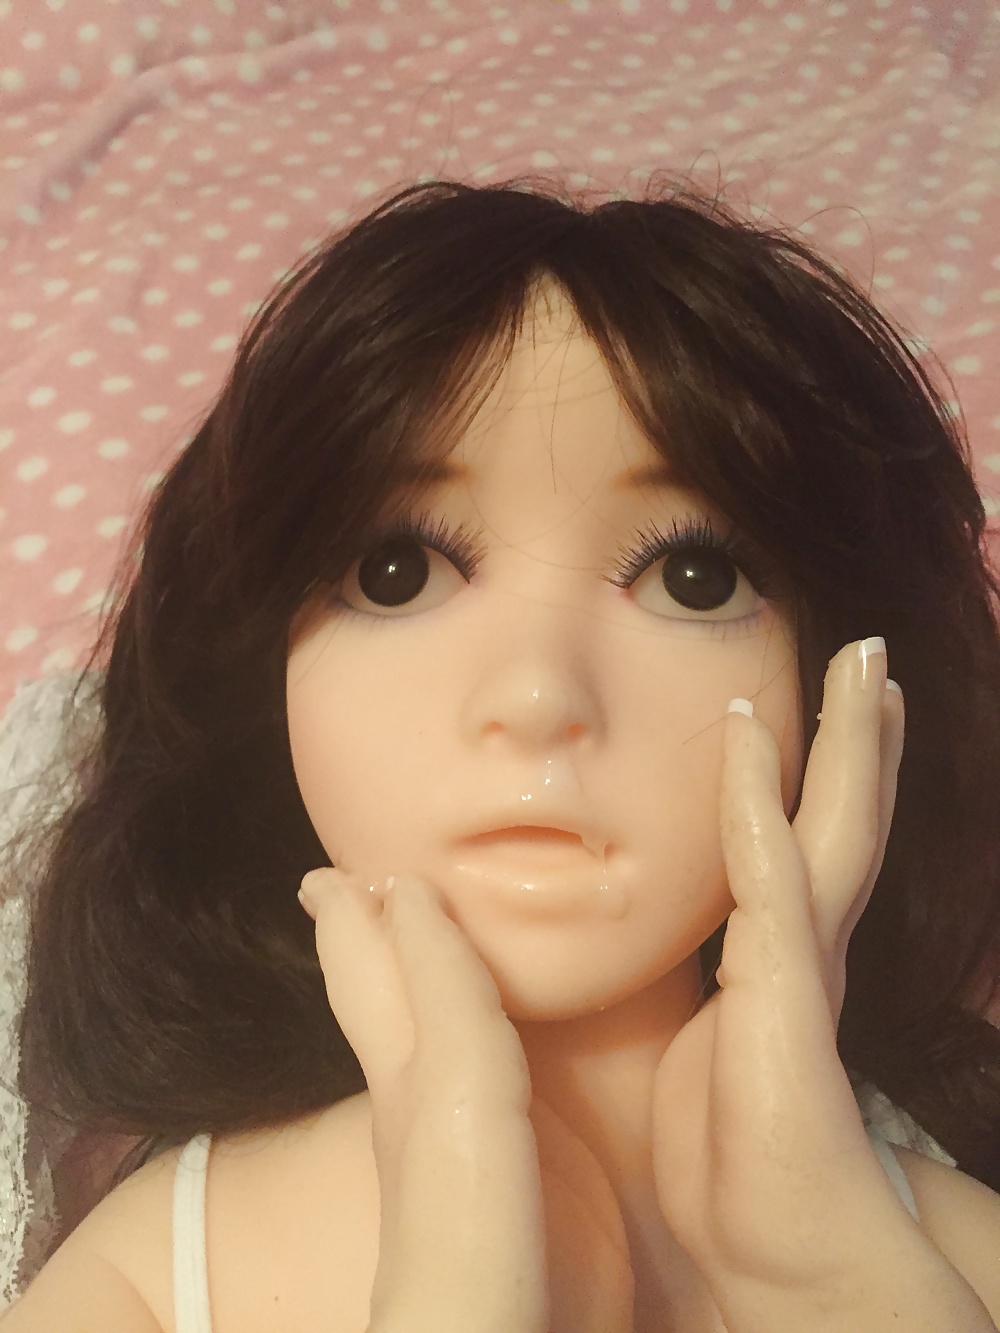 Sex Doll Cindy In Brown Wig Sucking Cock (10/34)